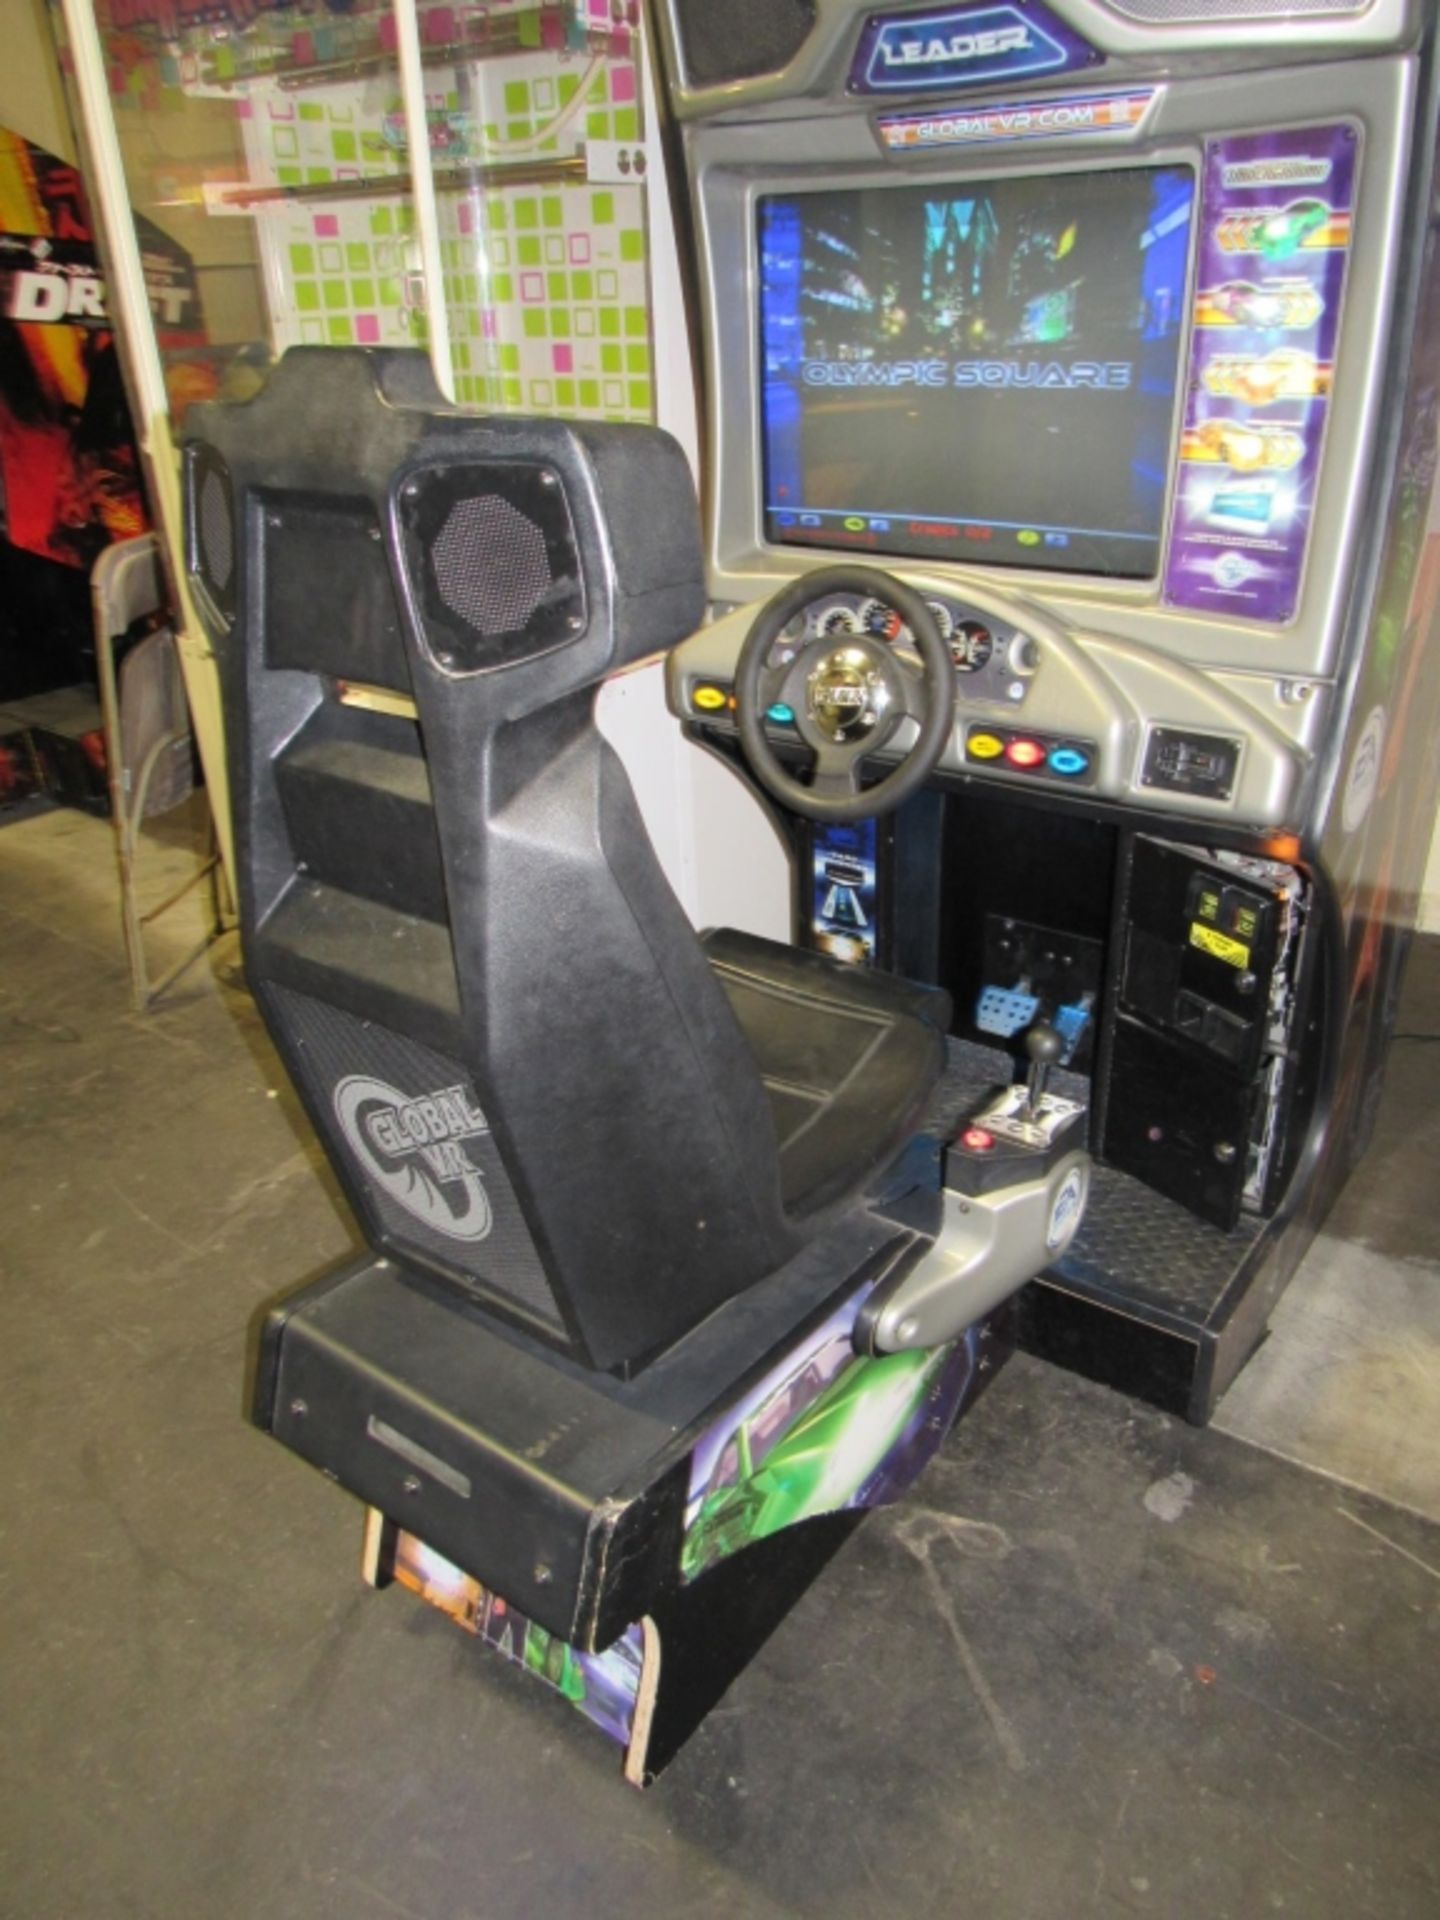 NEED FOR SPEED UNDERGROUND RACING ARCADE GAME #2 - Image 3 of 5